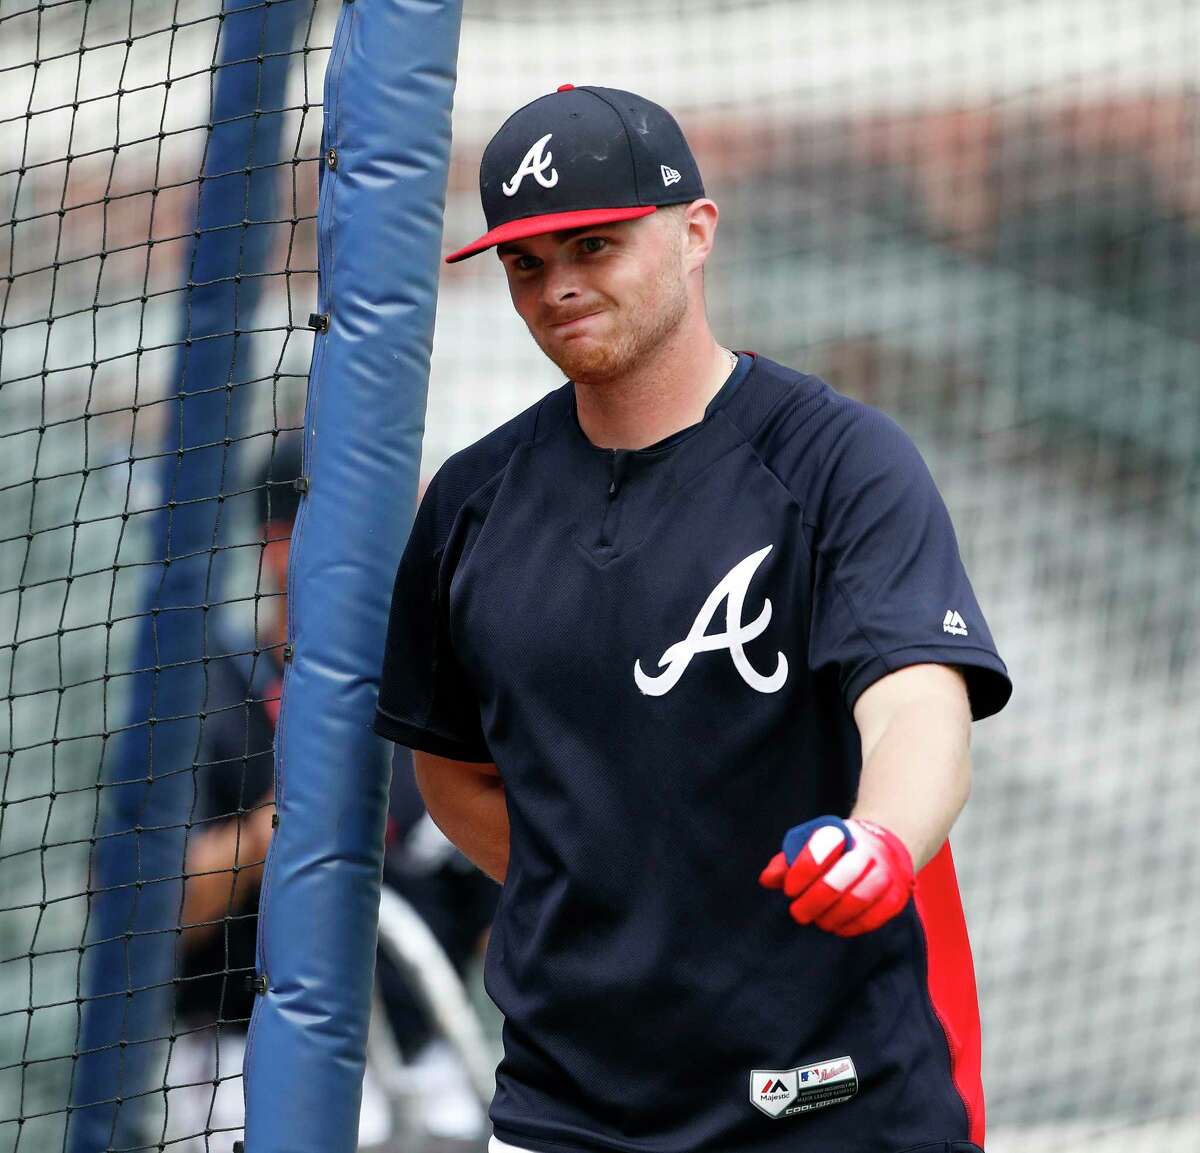 Atlanta Braves starting pitcher Sean Newcomb (15) is shown during batting practice before of a baseball game against the Miami Marlins Monday, July 30, 2018 in Atlanta. Newcomb apologized Sunday for racist, homophobic and sexist tweets he sent as a teenager, calling them "some stupid stuff." "I definitely regret it, for sure," he said. (AP Photo/John Bazemore)